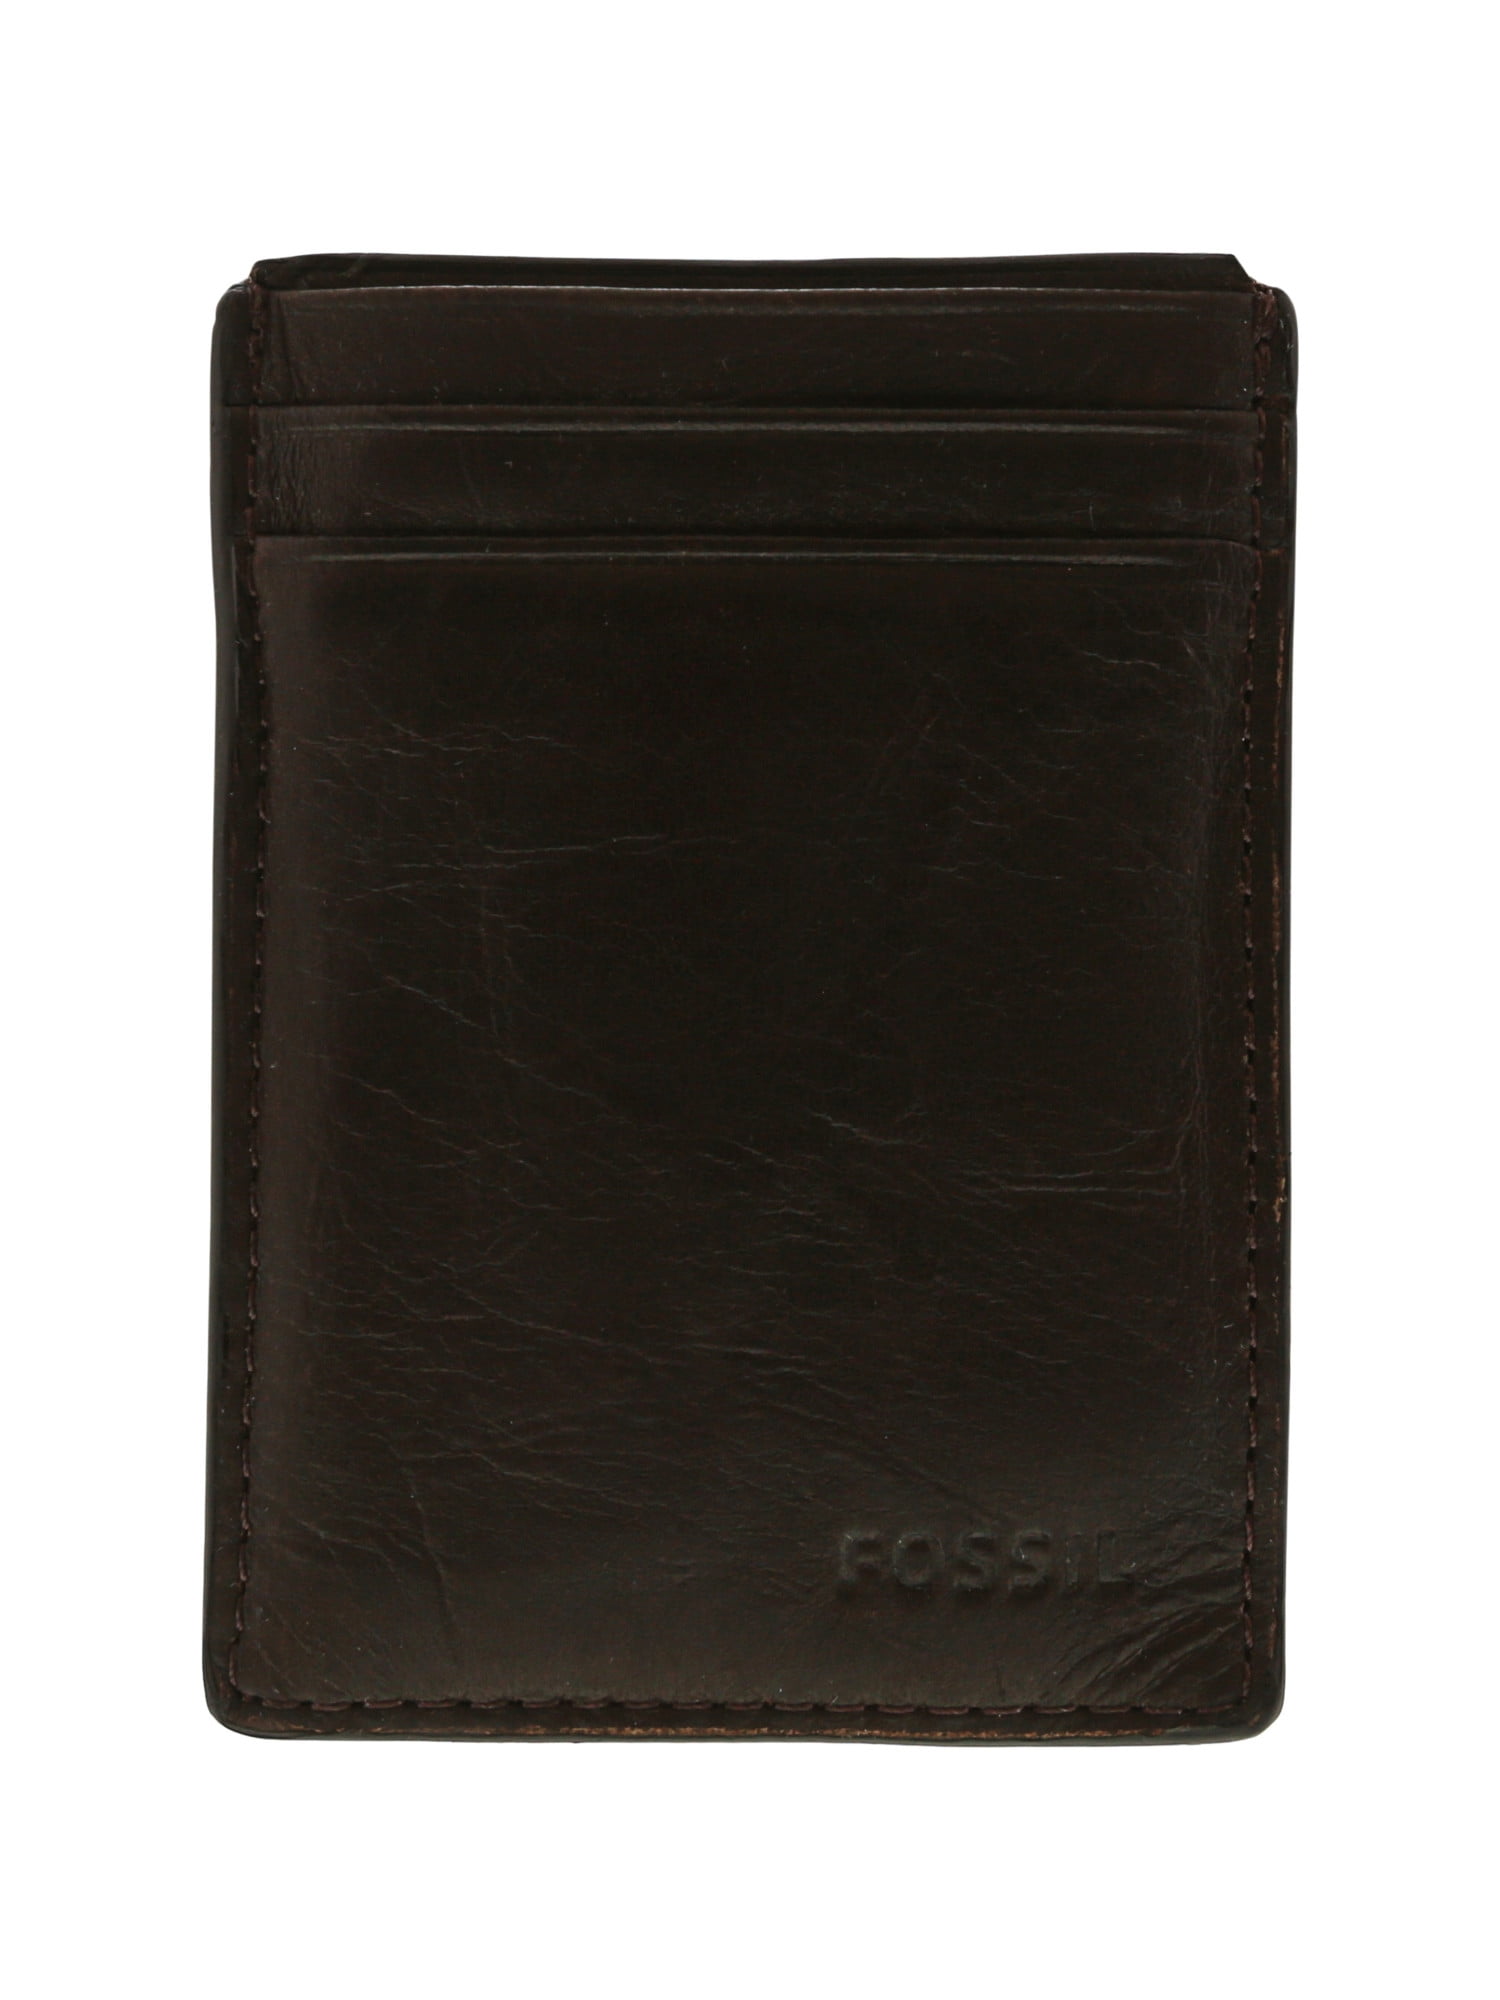 Visconti AG15 Oakmont Mens ID and Credit Card Holder Case Augusta Collection